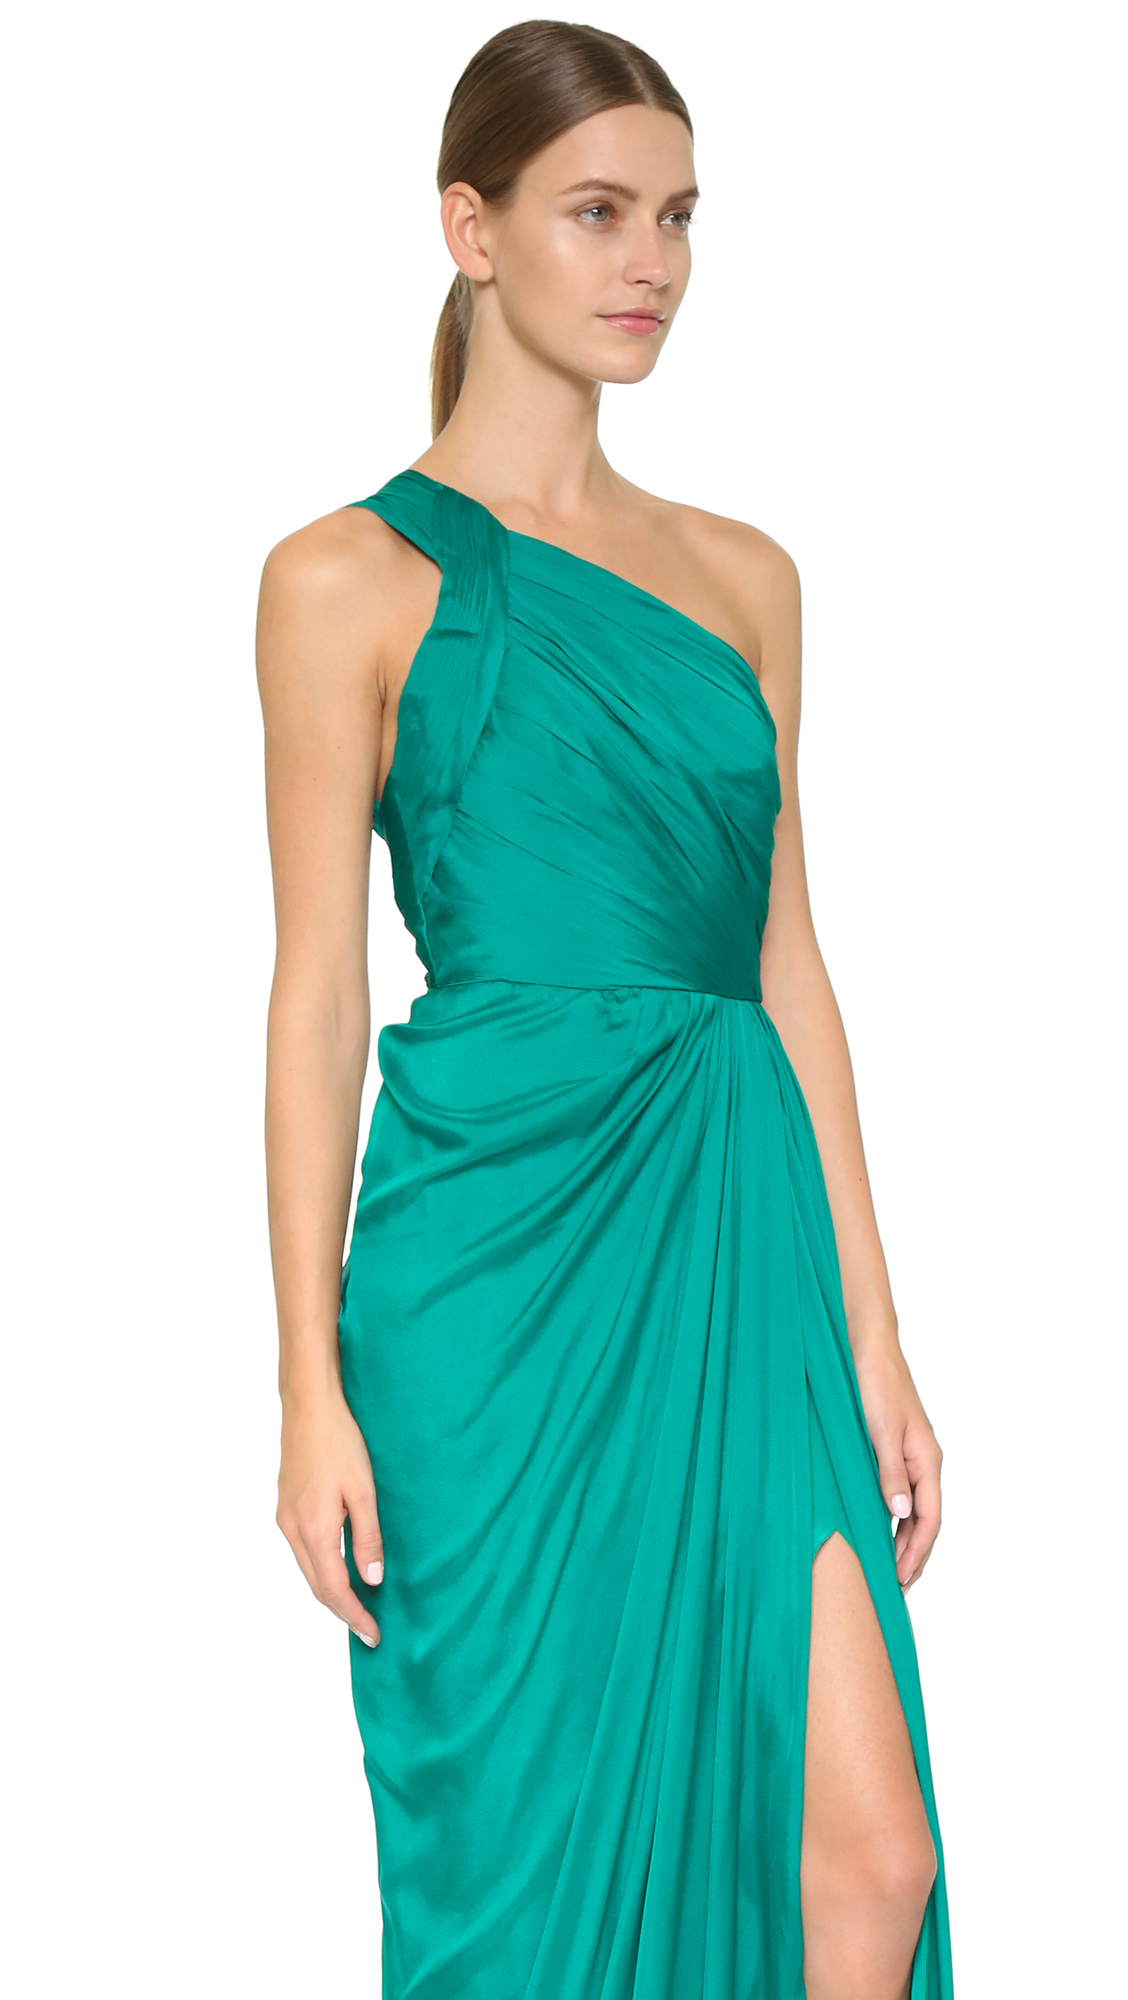 Lyst - Monique Lhuillier One Shoulder Draped Gown - Emerald in Green